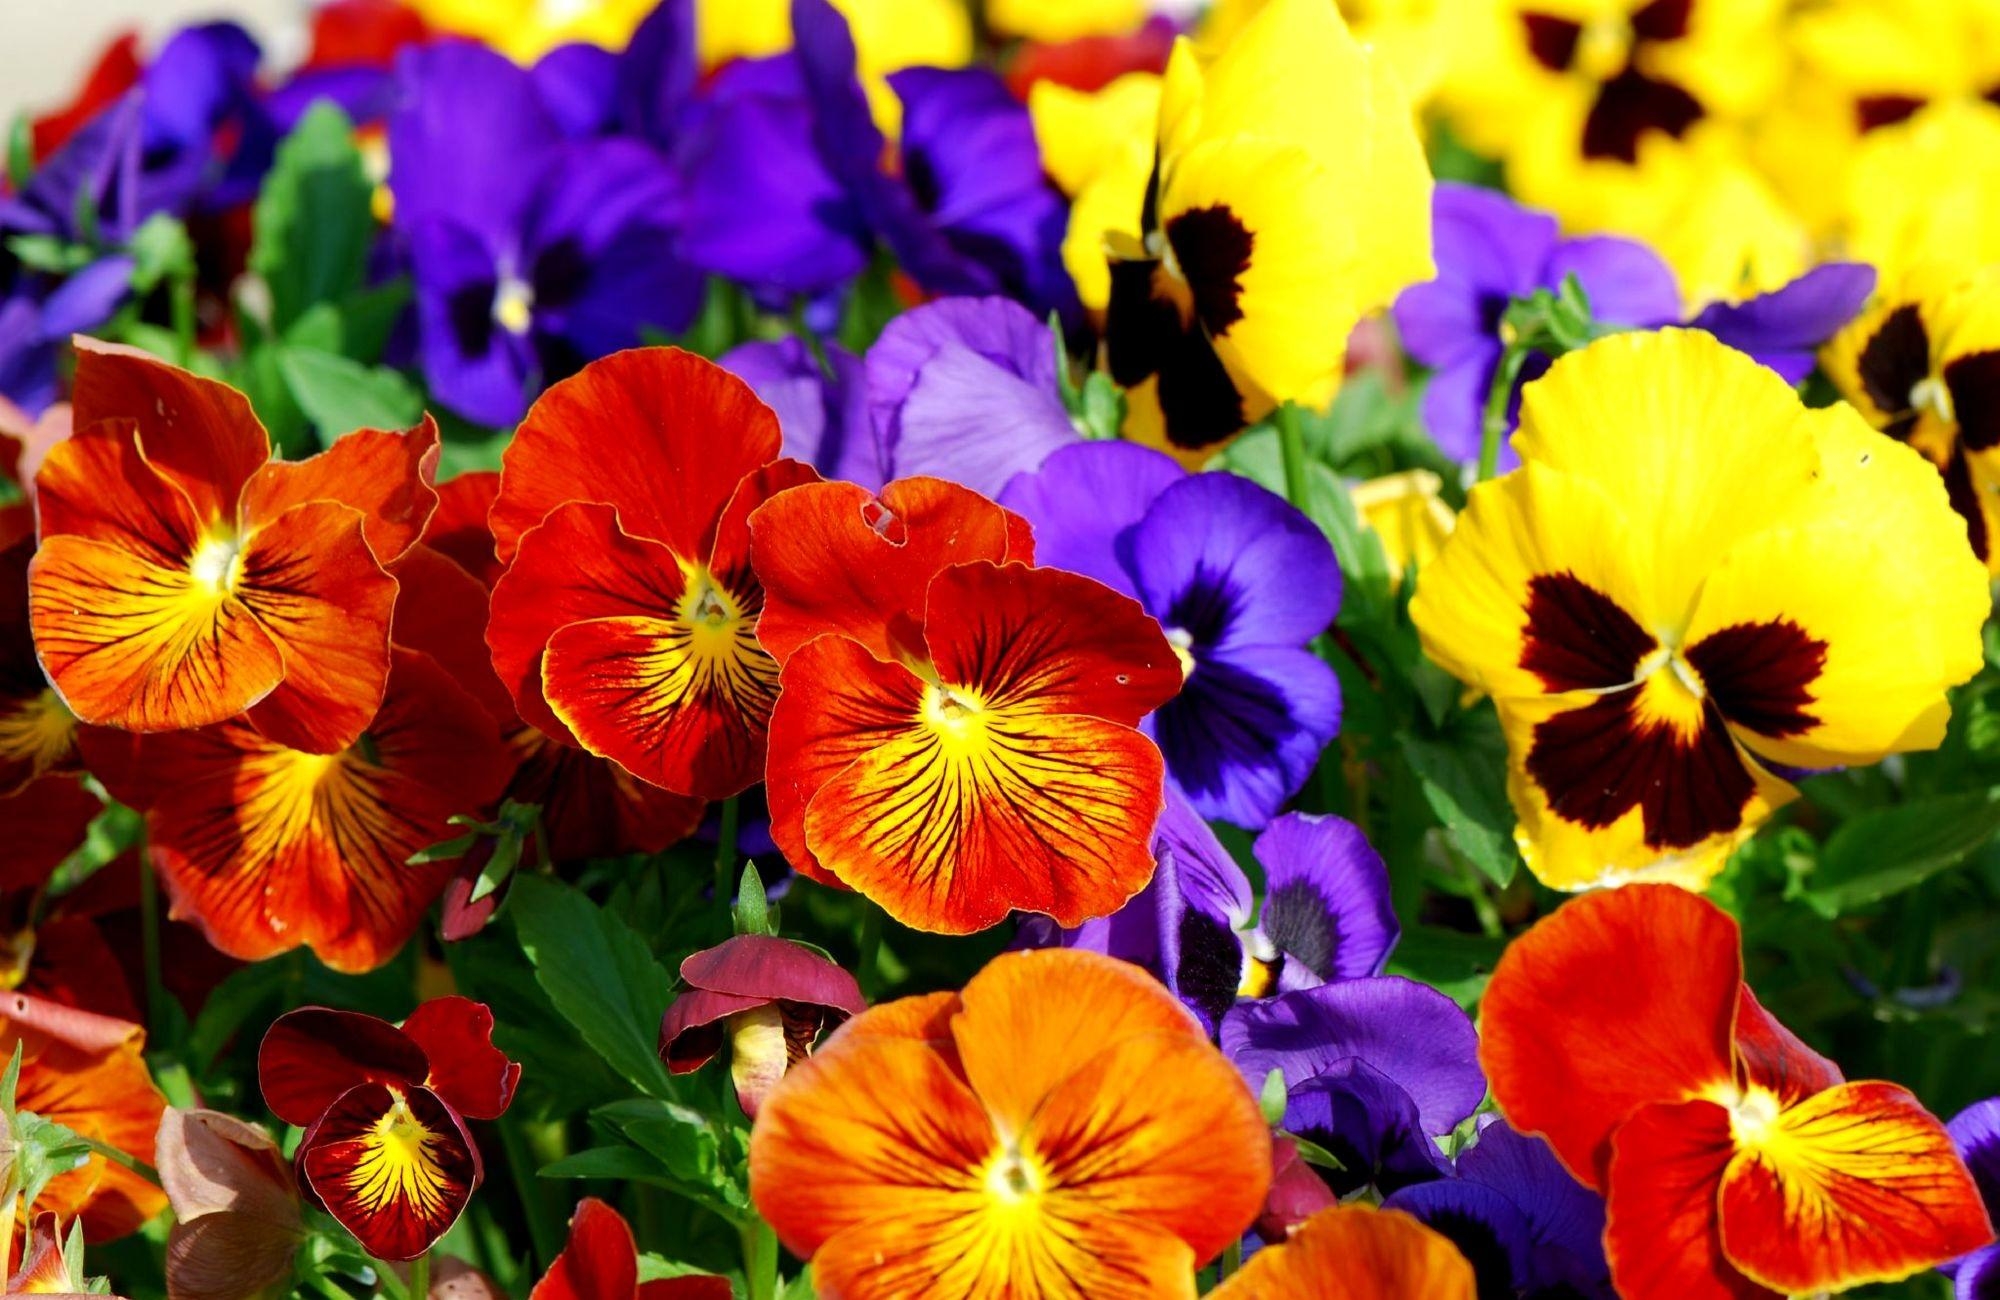 146917 download wallpaper flowers, pansies, bright, multicolored screensavers and pictures for free